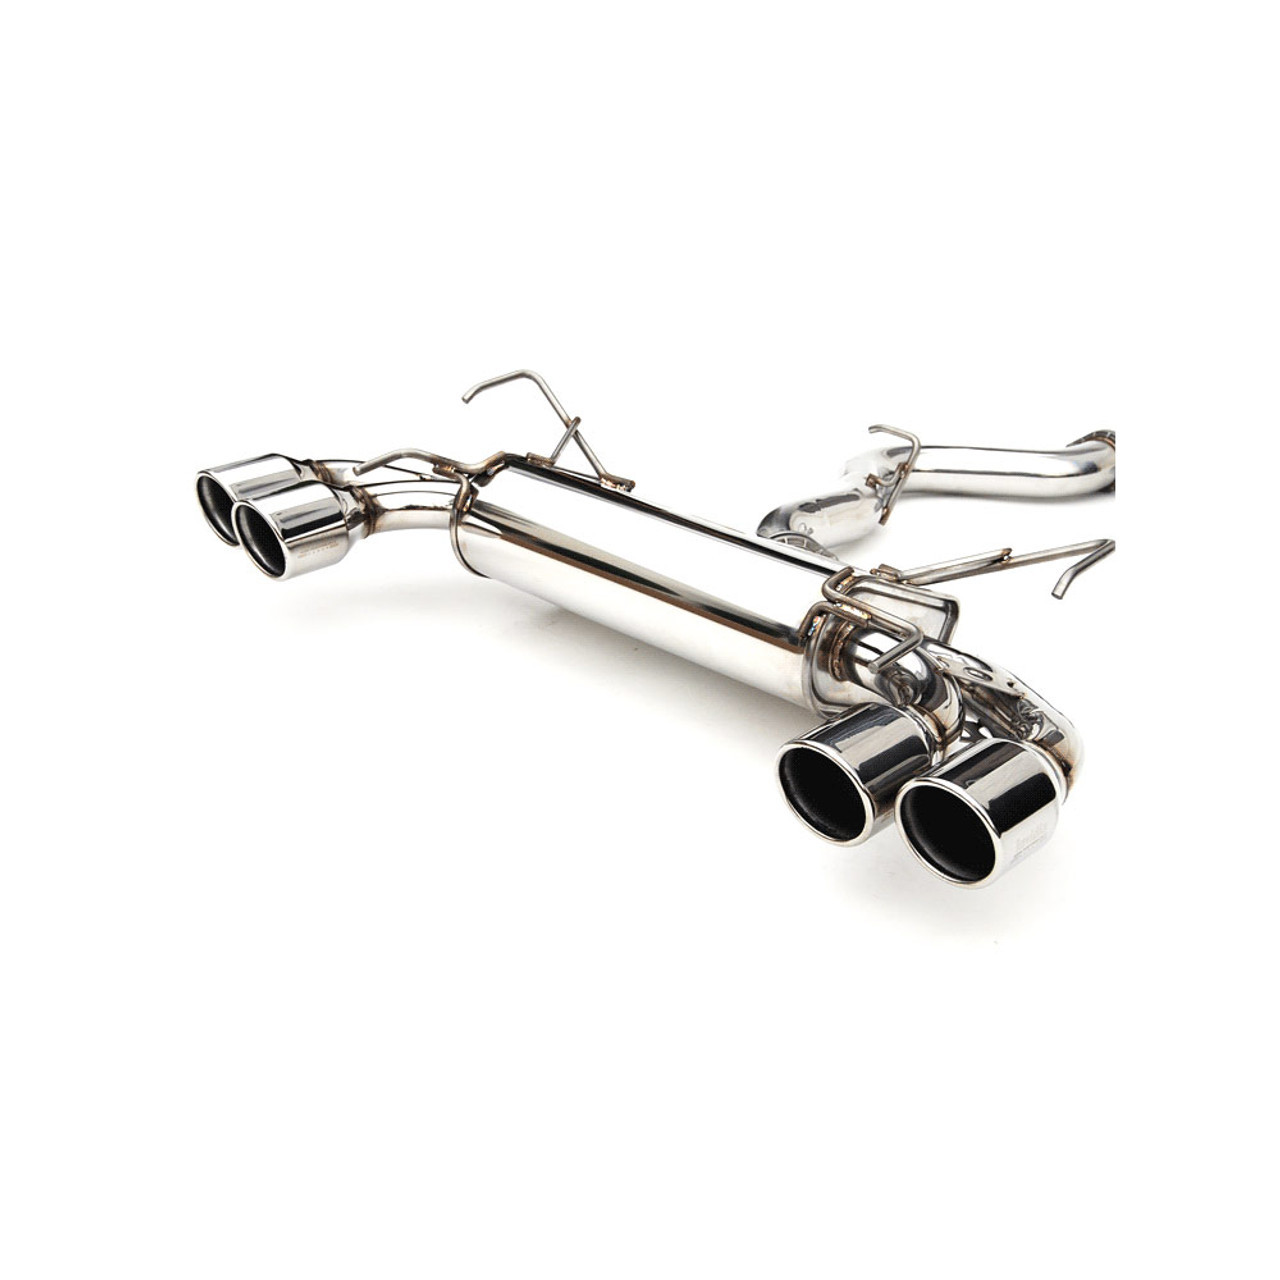 Invidia 08+ STi Hatch Dual Q300 Stainless Steel Tip Cat-back Exhaust - Angle